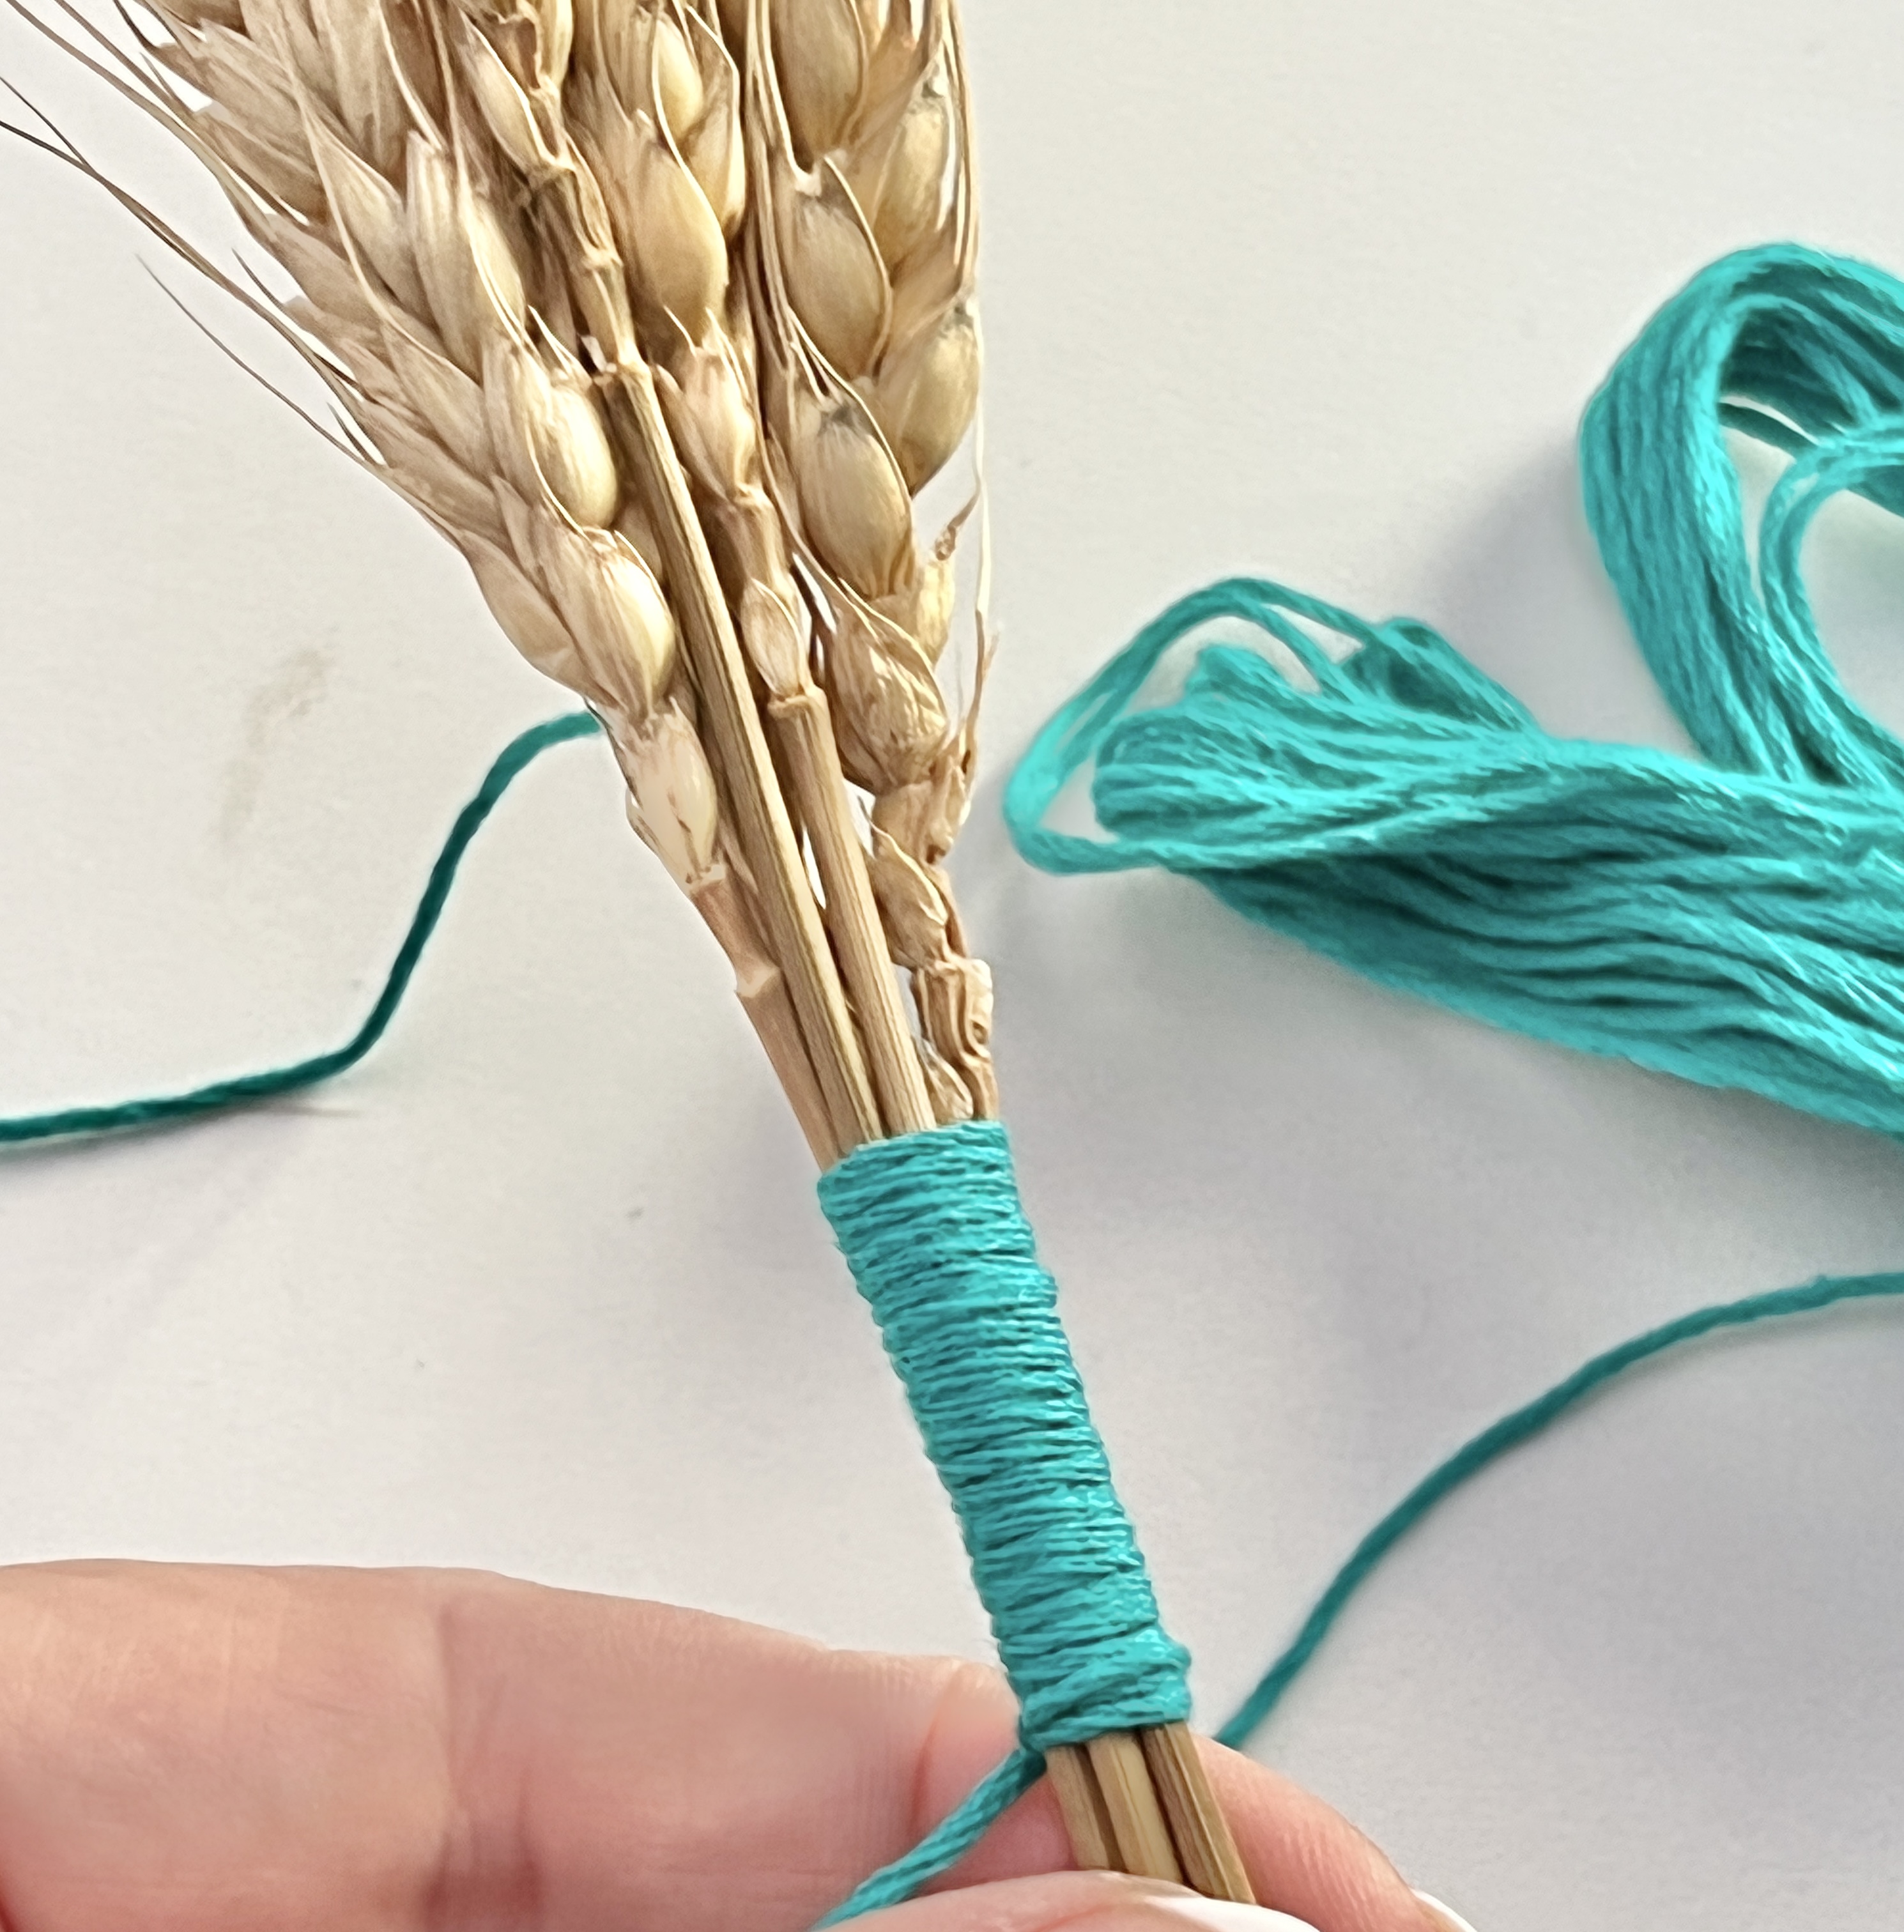 Wrapping the thread around the wheat bundle to the length of an inch.